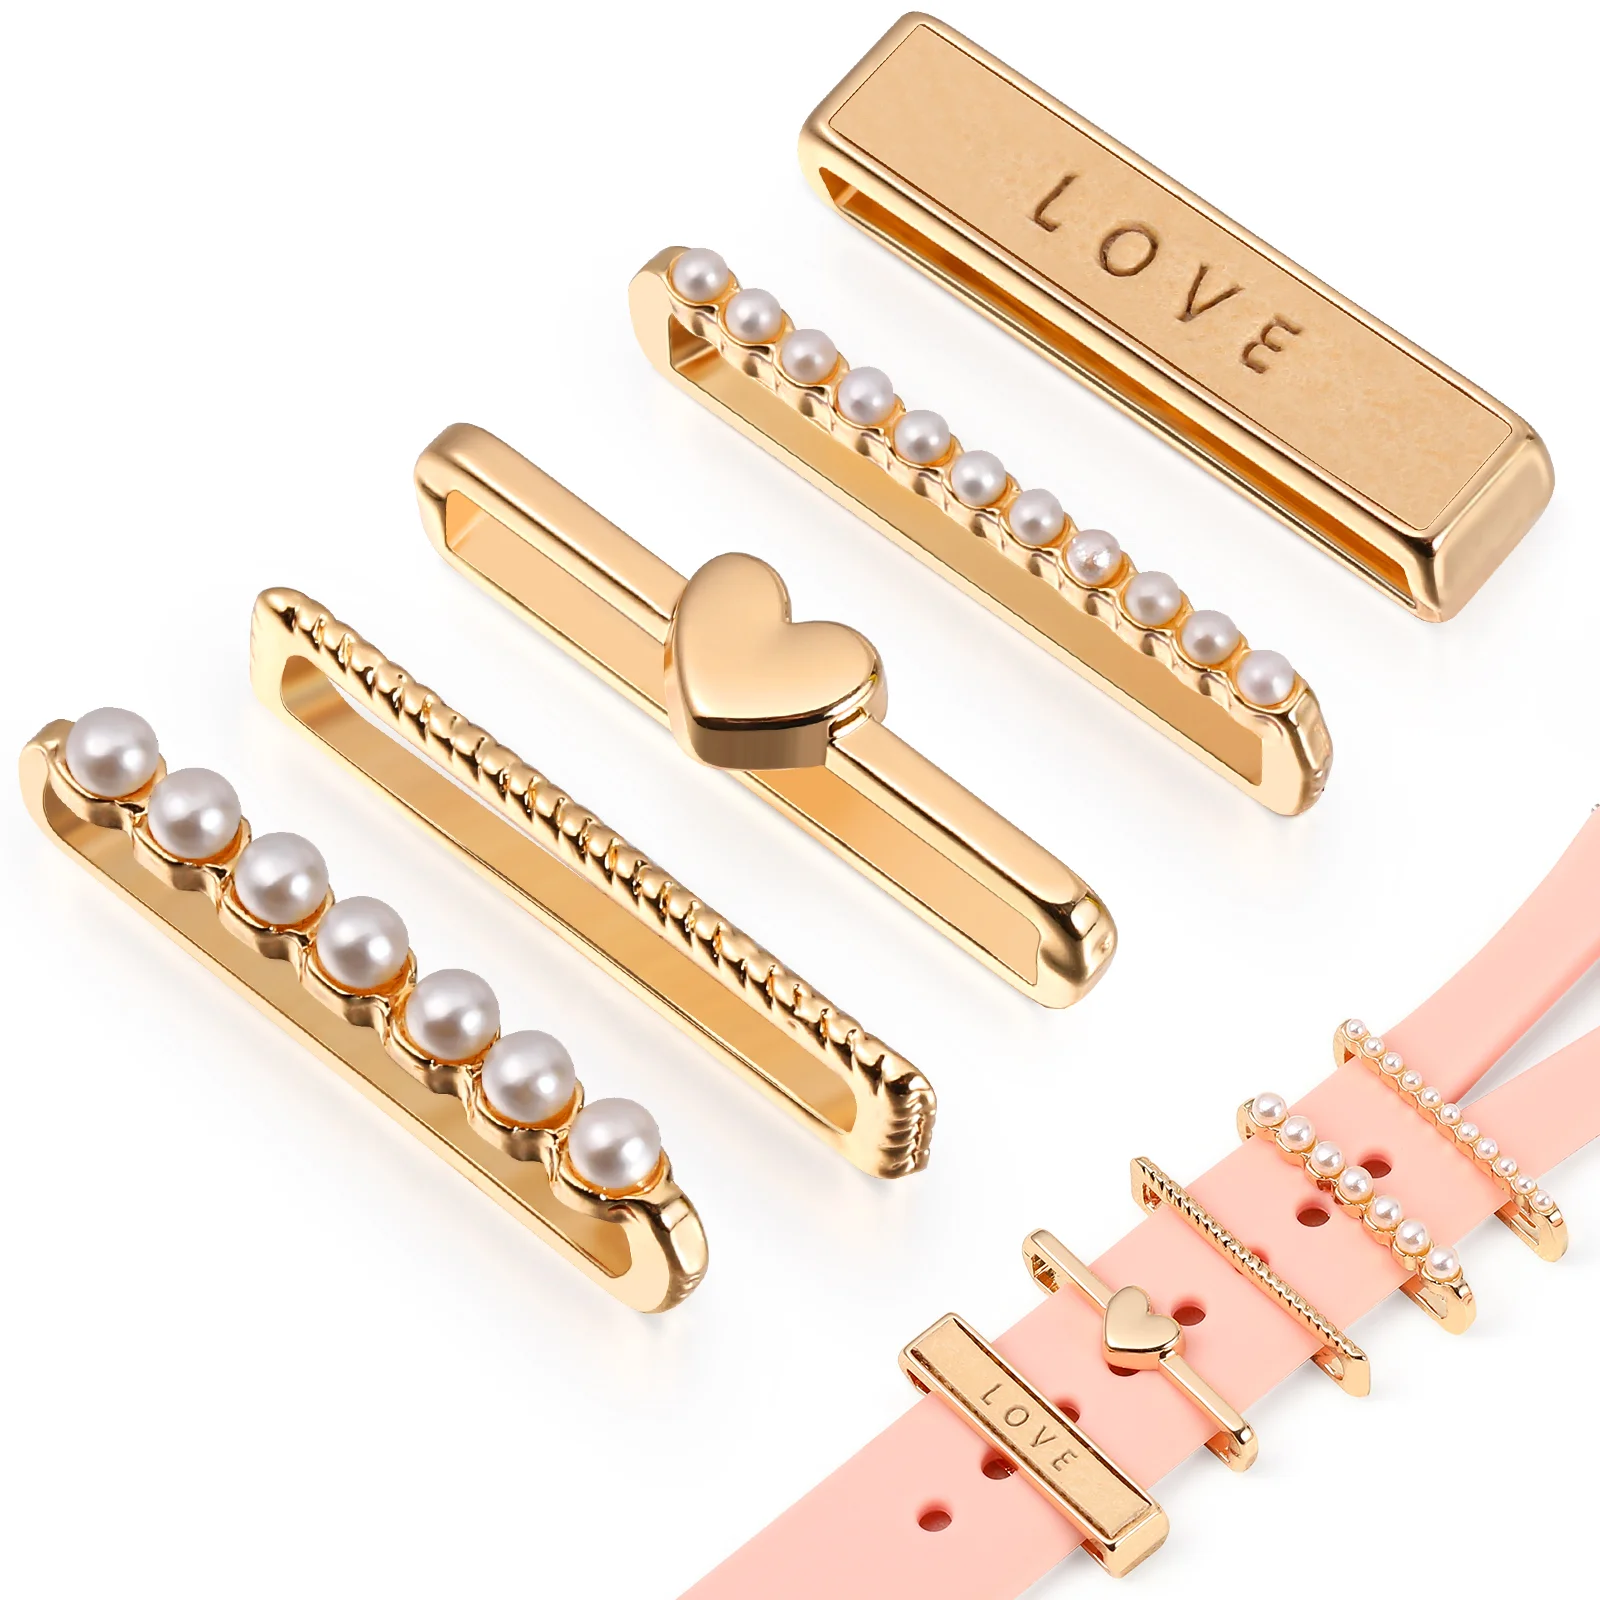 

Watch Band Charms Decorative Rings Strap Ring Metal Accessories A Pple Charm Wristband Silicone Women Personalized Watchband